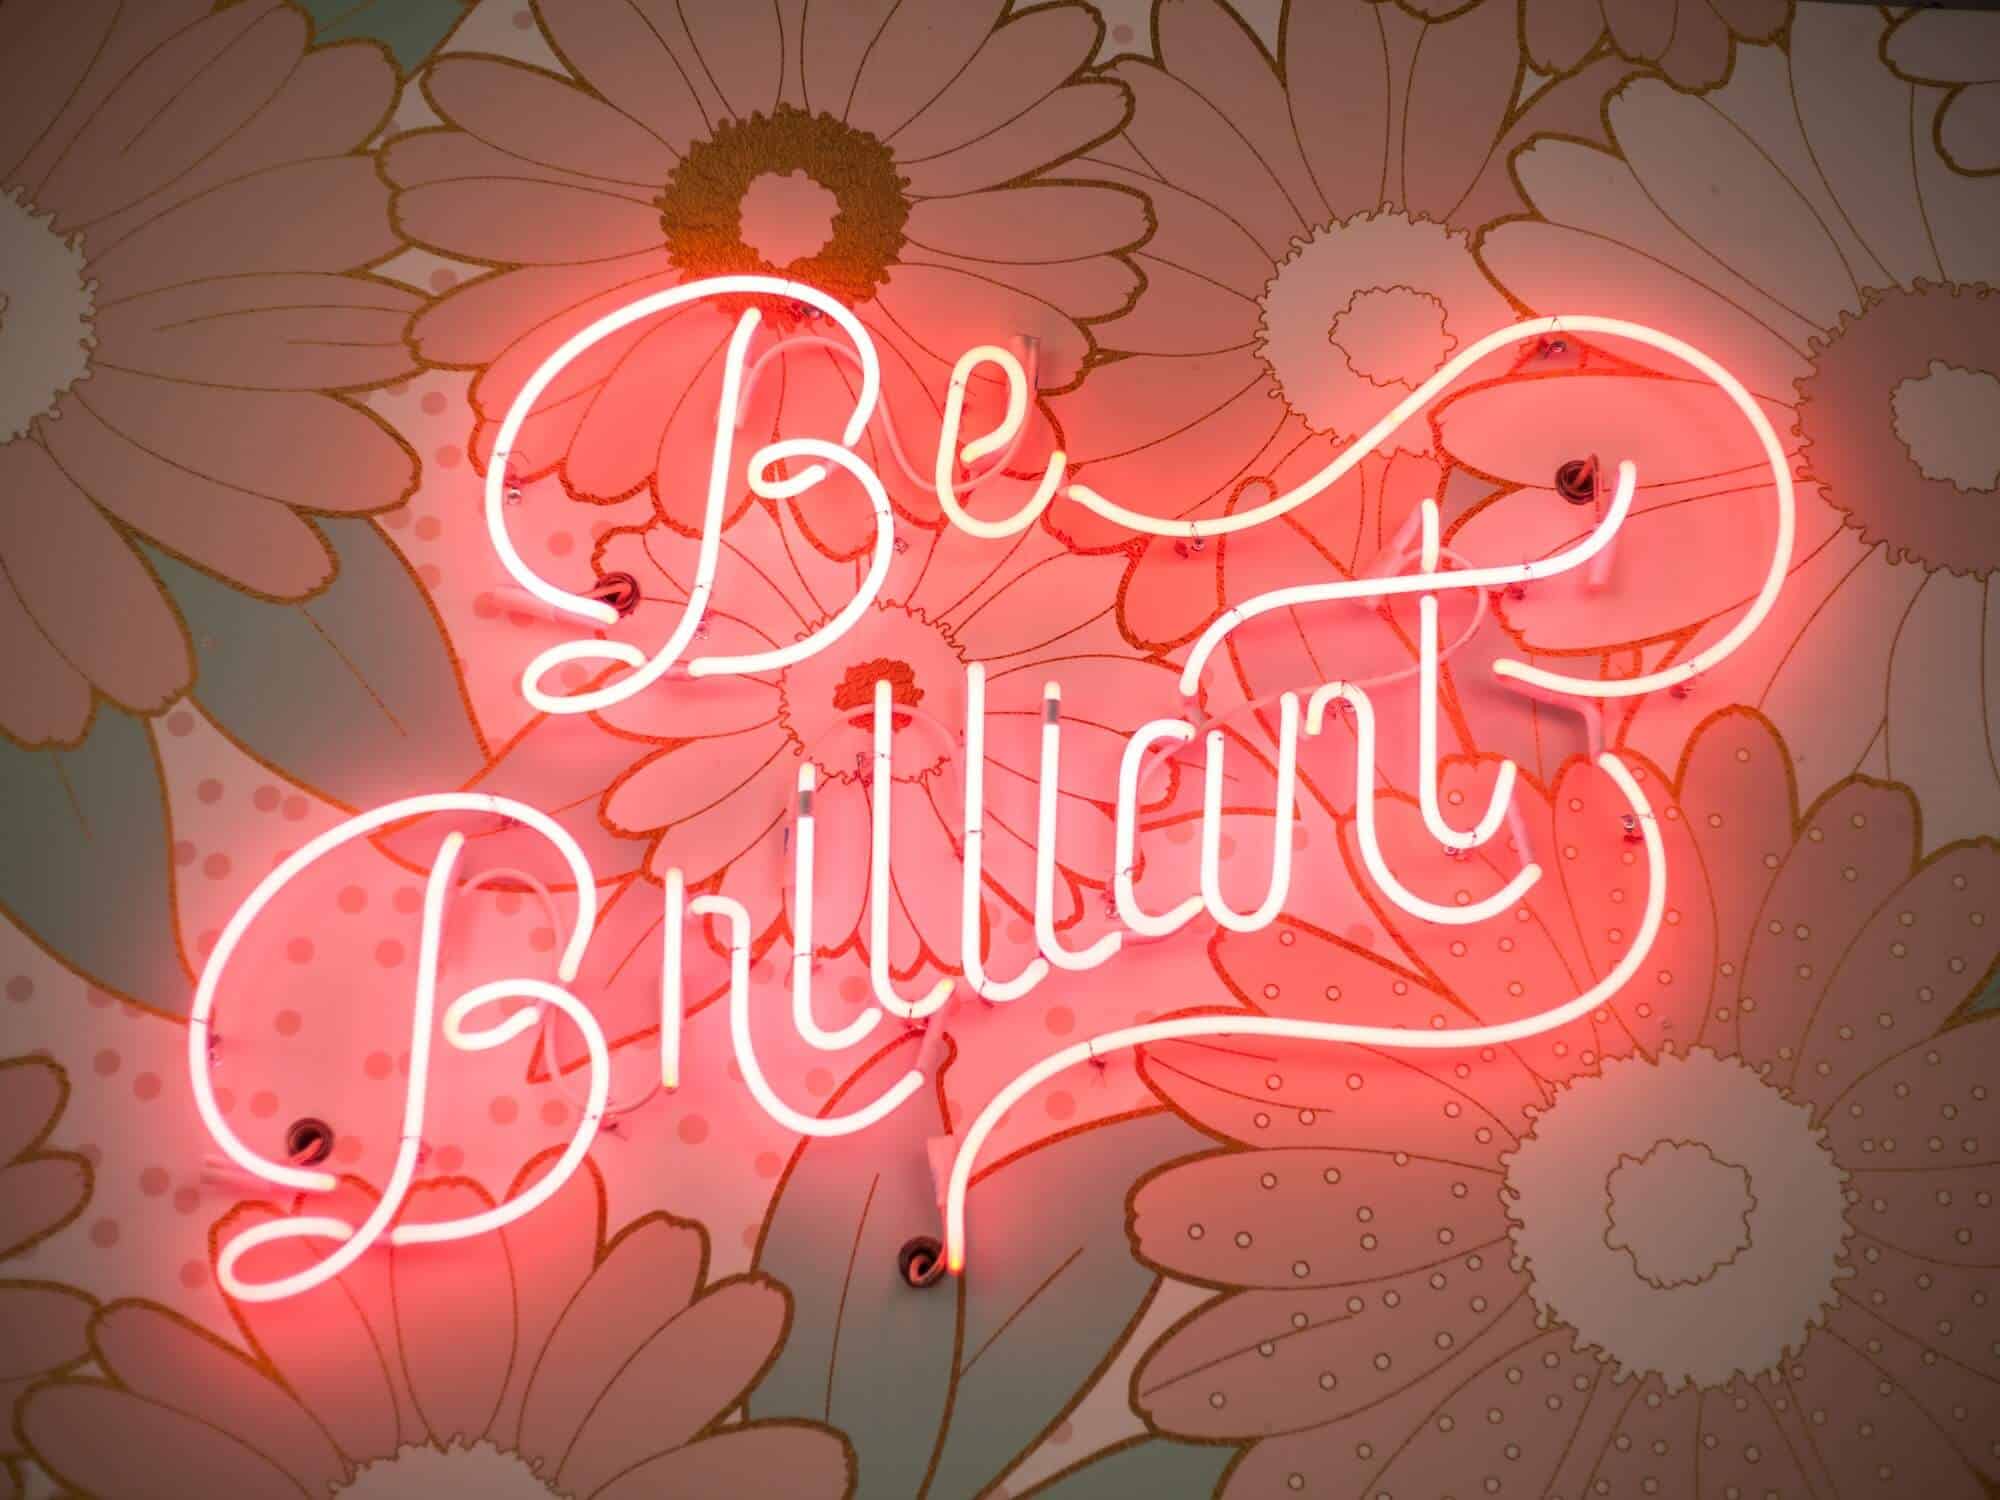 A-pink-neon-sign-that-reads-"Be-Brilliant"-in-looping-text-mounted-to-a-wall-with-floral-wallpaper.